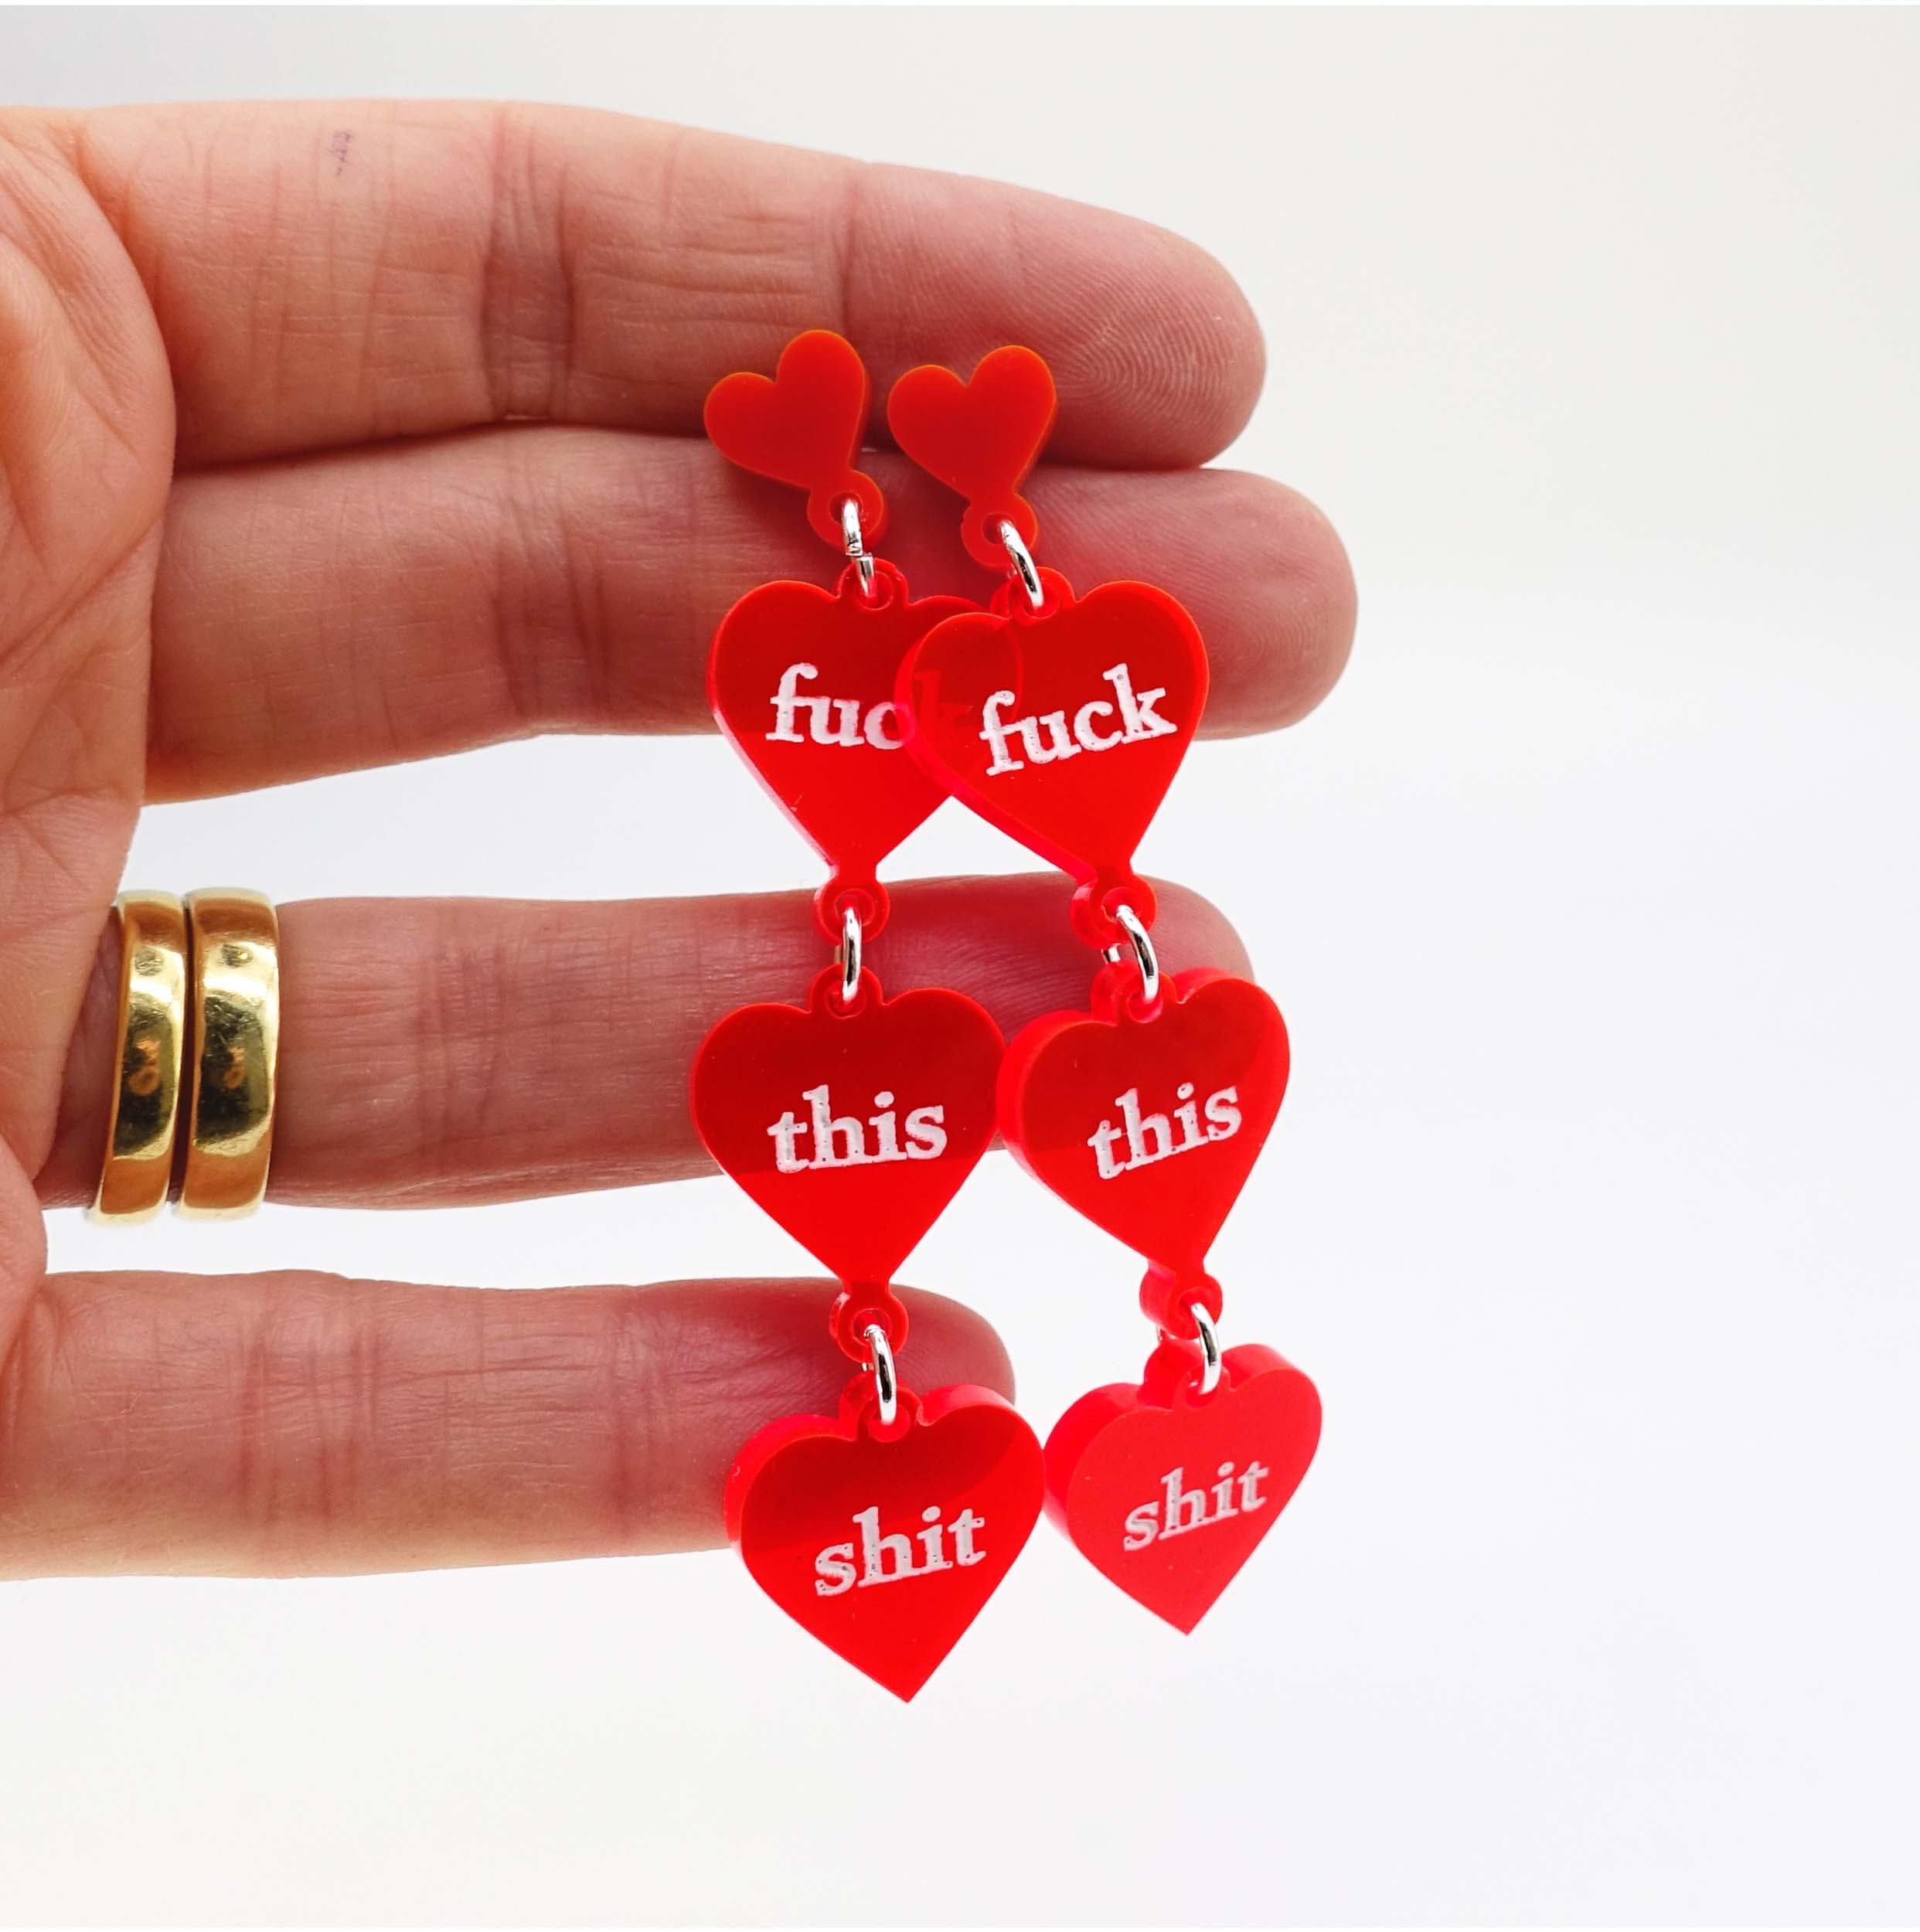 Hot red f*ck this sh*t heart earrings being held up for scale. 